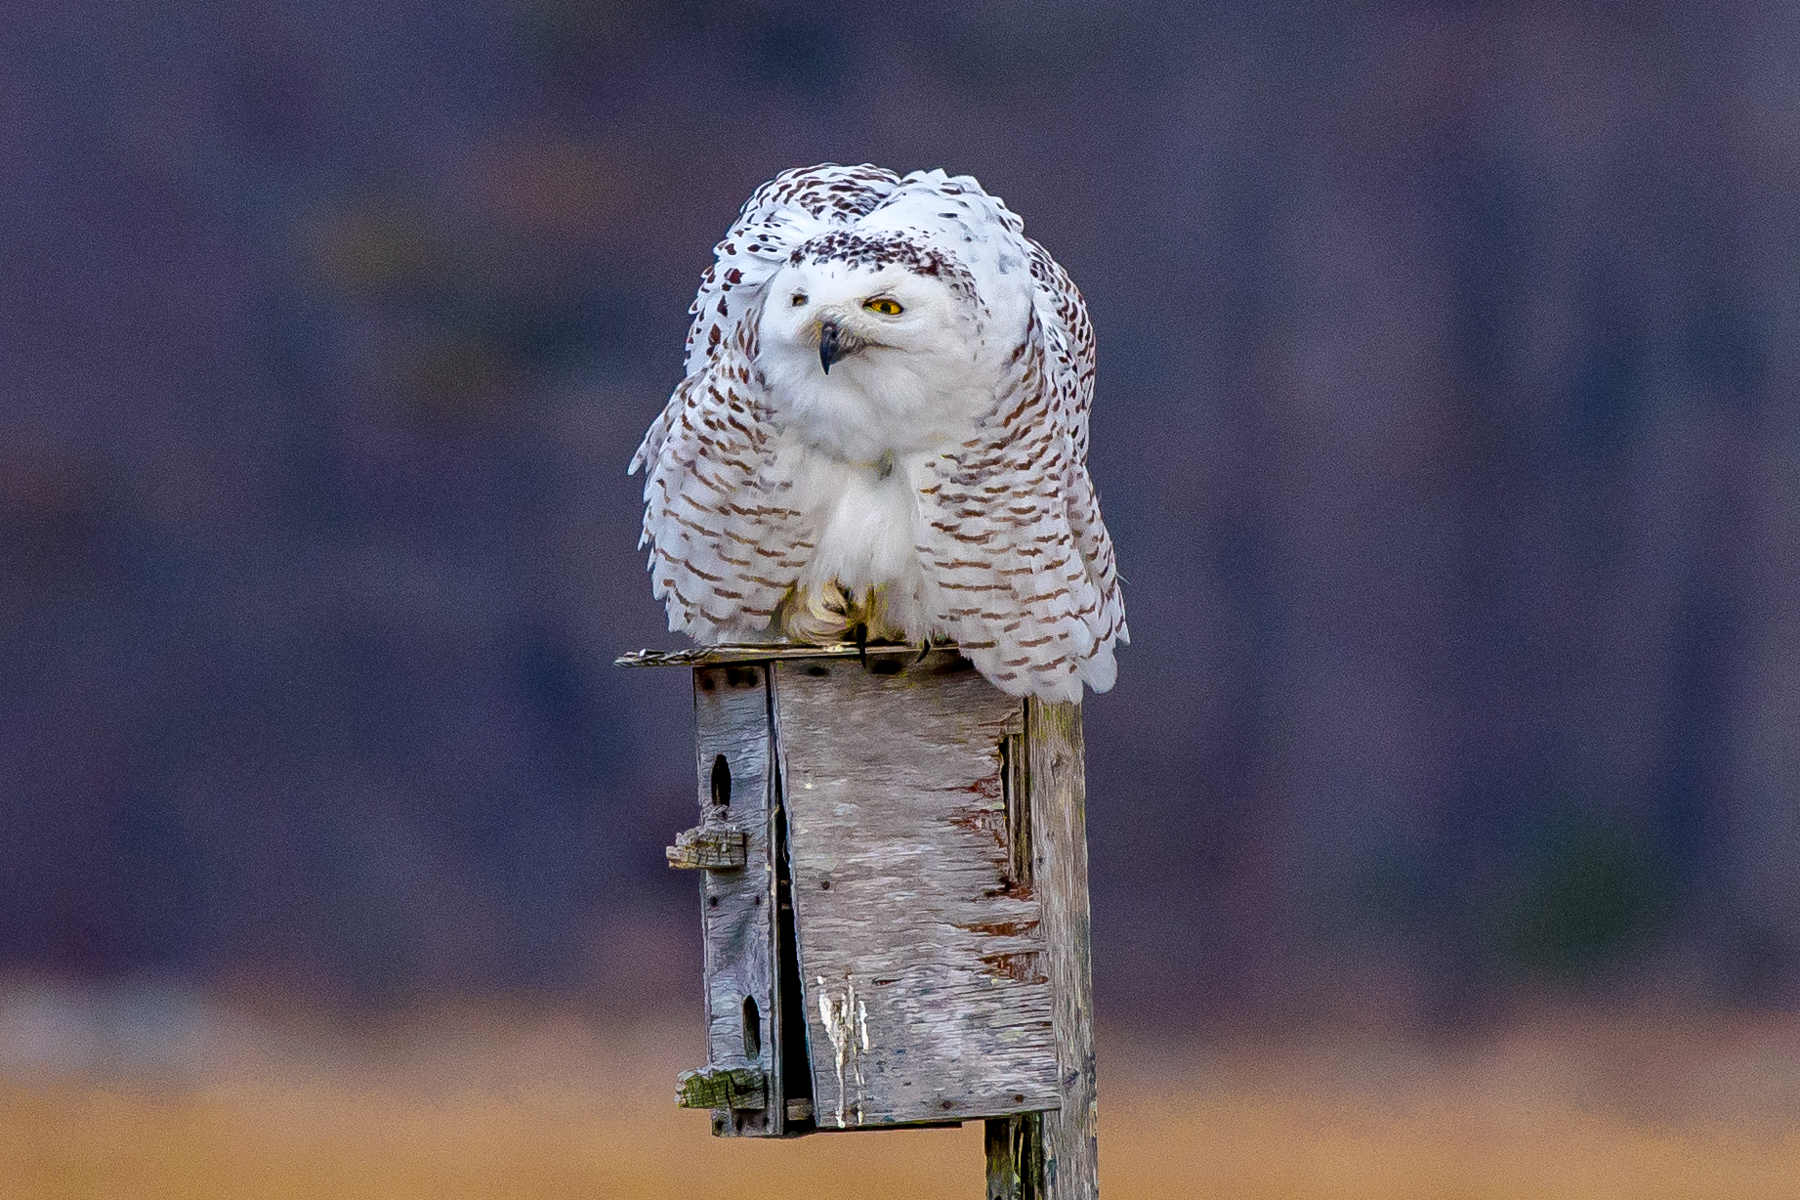   A snowy owl sitting on a bird house along the New Hampshire coast. &nbsp;These owls will be heading back north soon. &nbsp;3/7/16  